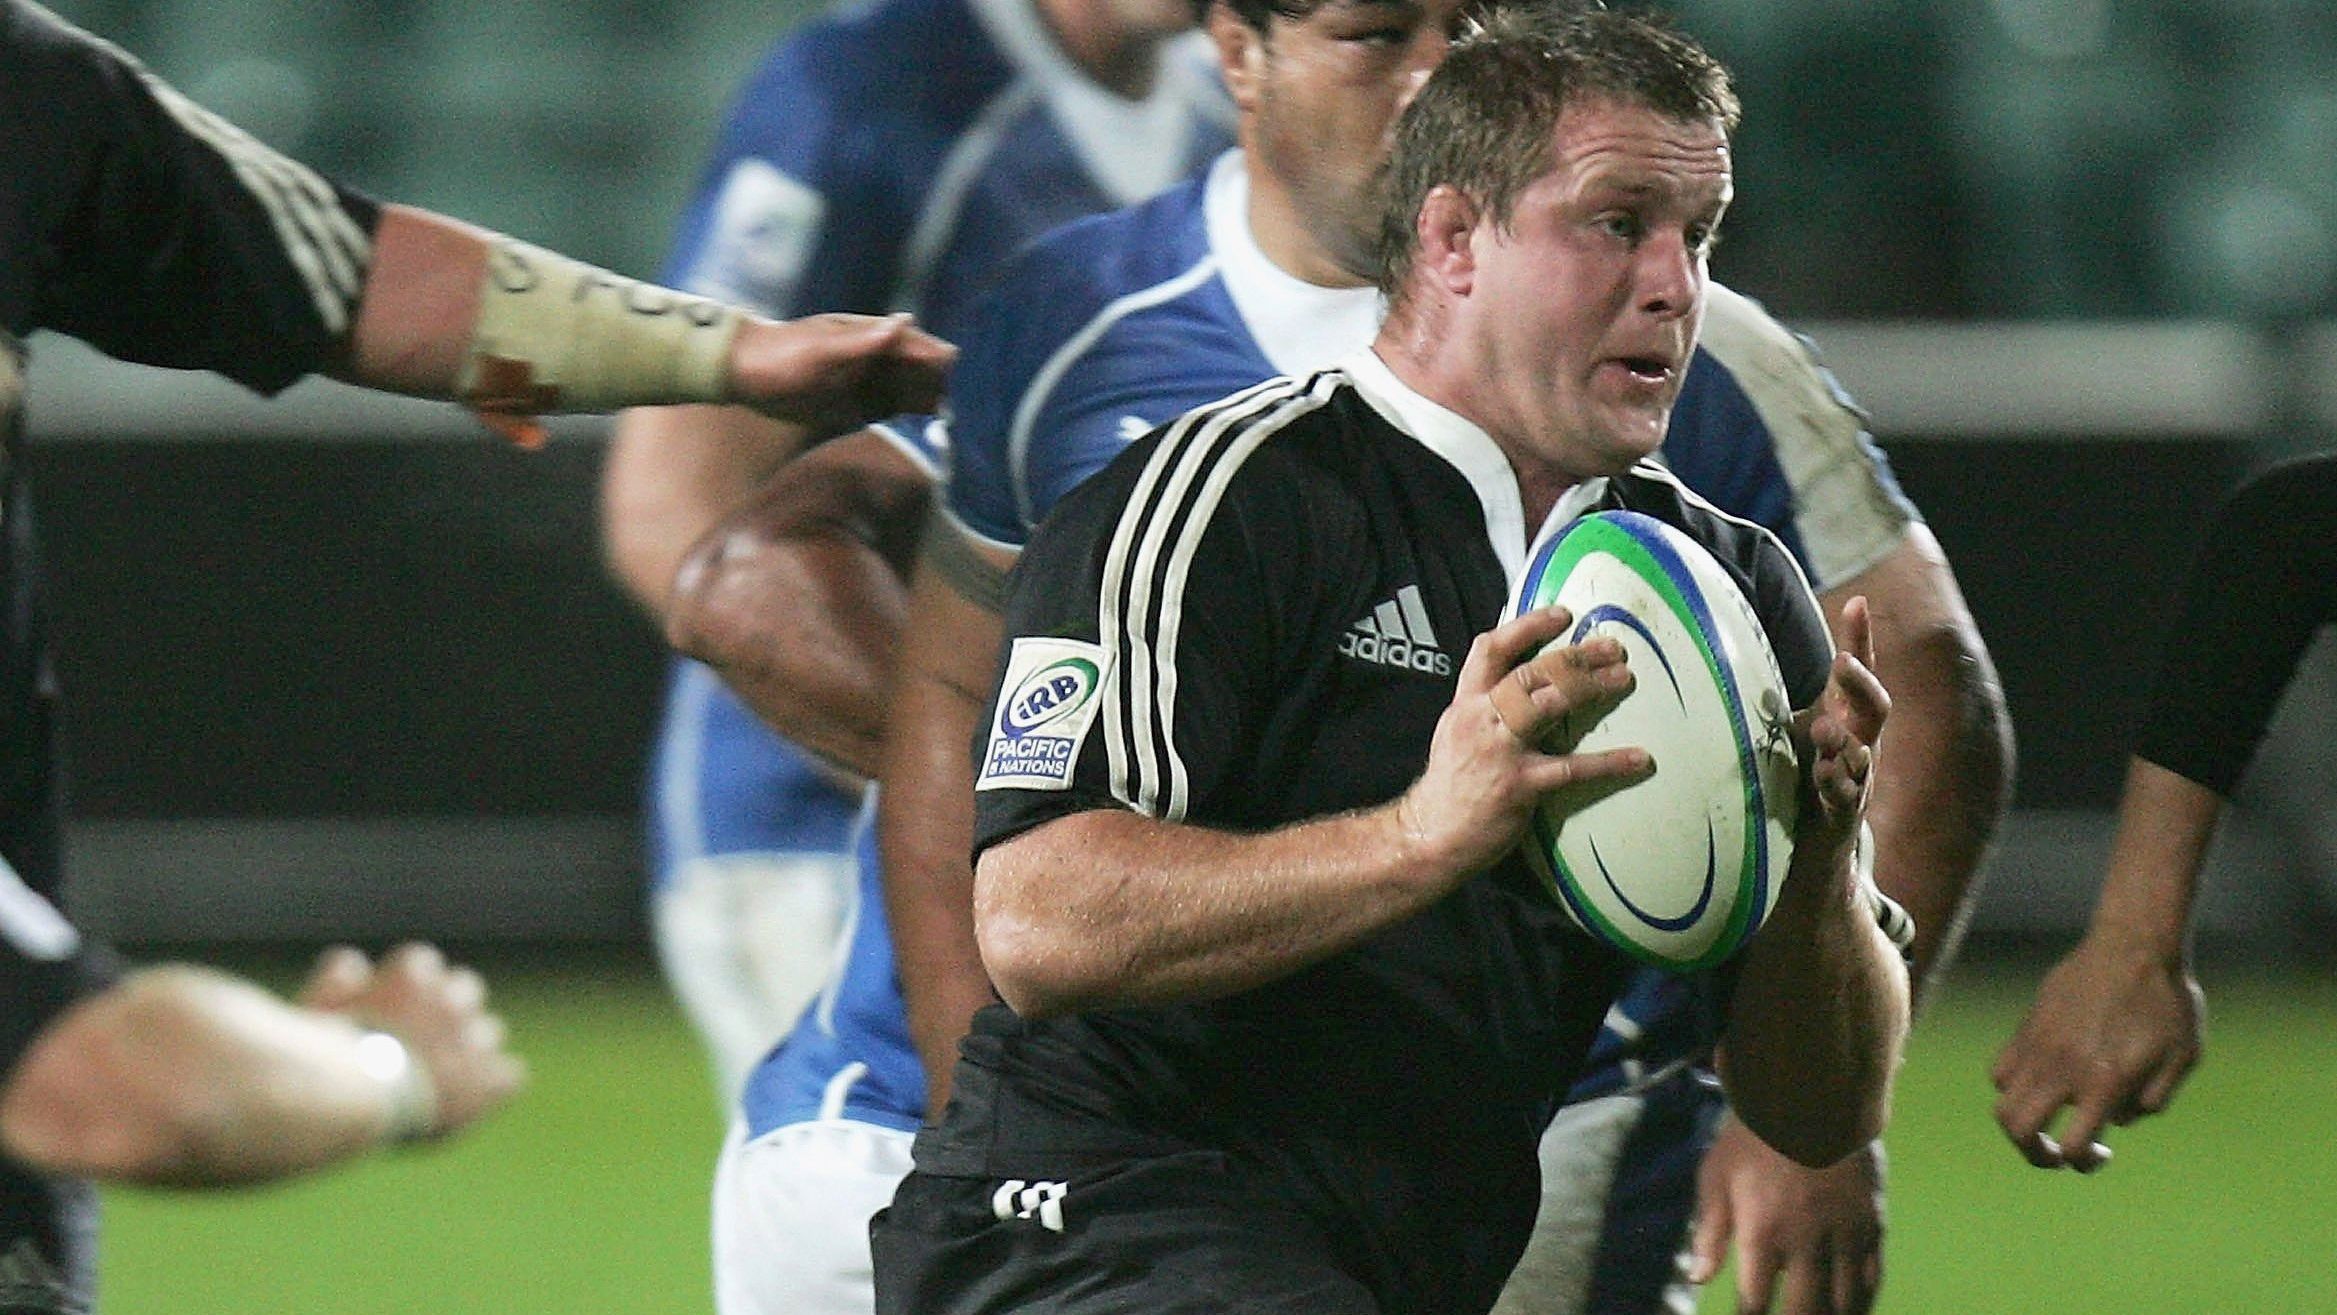 Campbell Johnstone comes out as first openly gay New Zealand All Blacks player